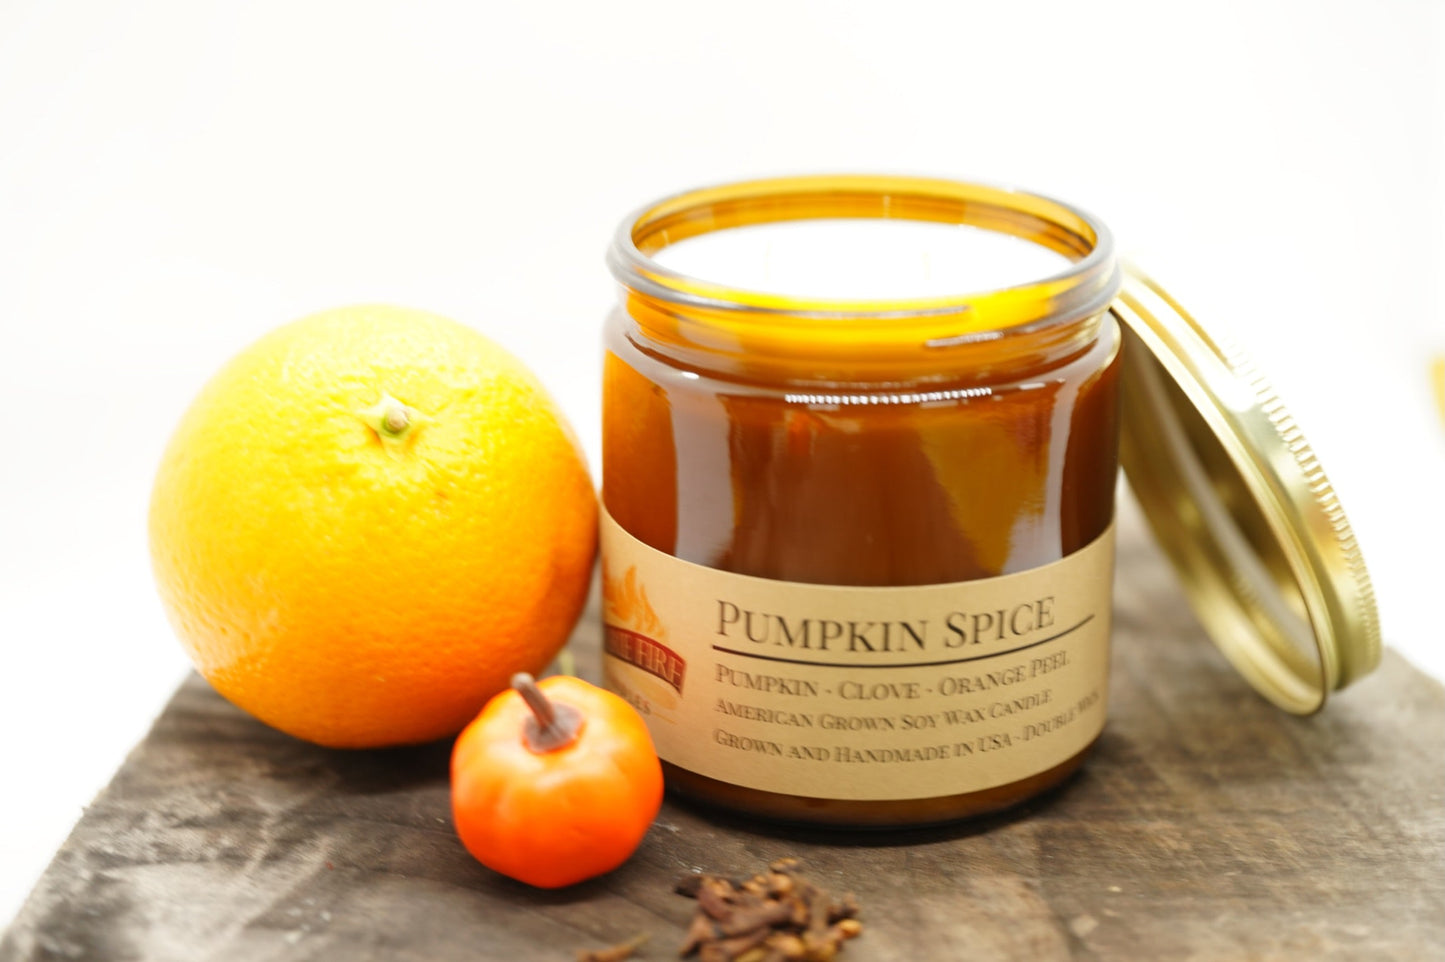 Pumpkin Spice Soy Candle | 16 oz Double Wick Amber Apothecary Jar